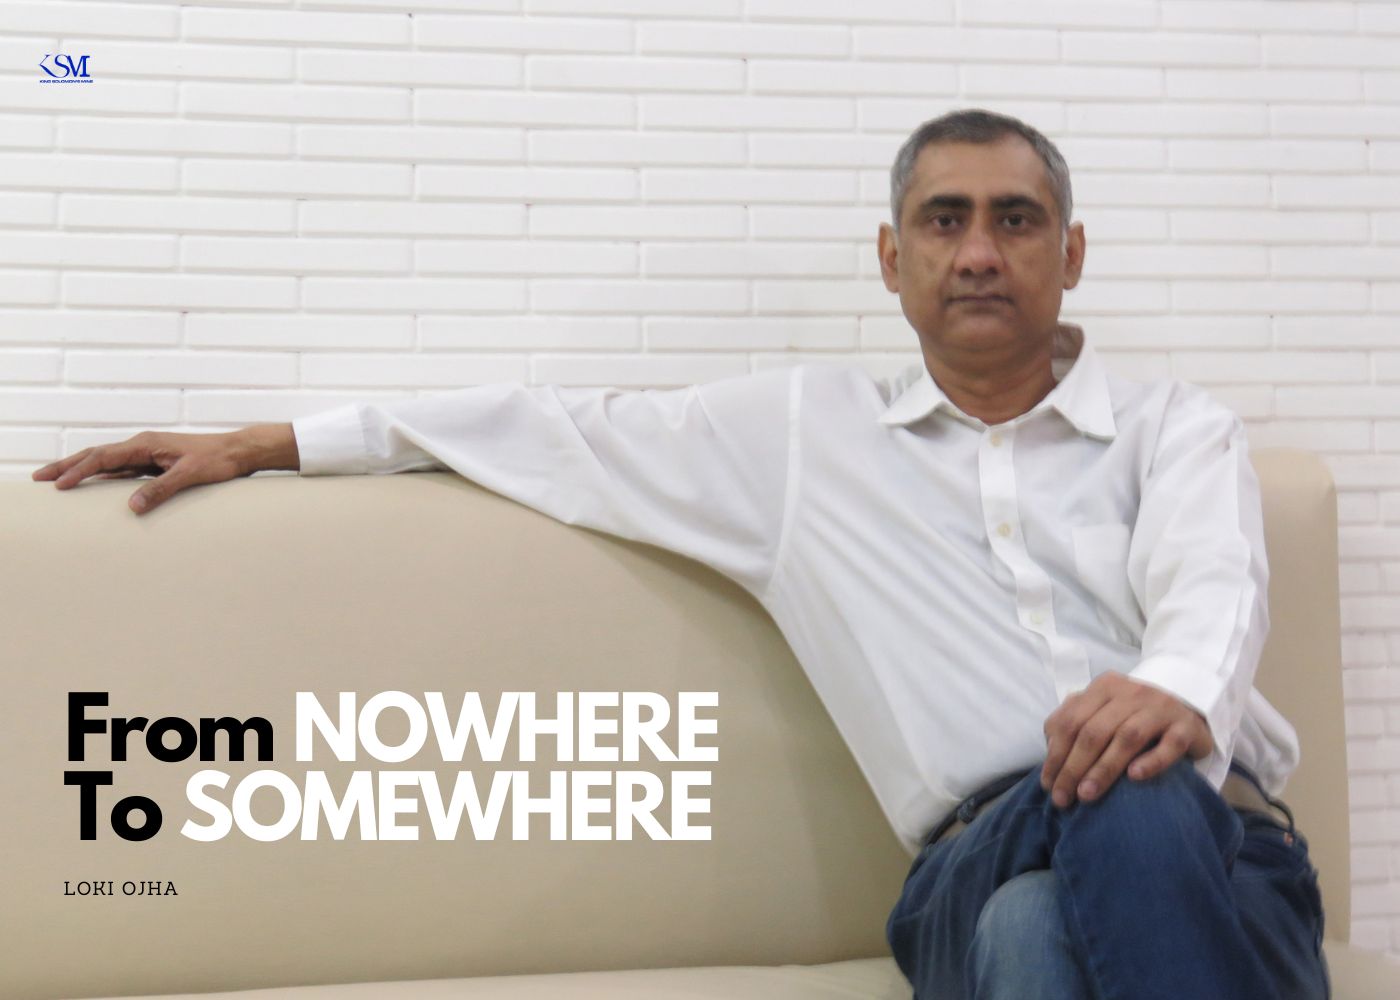 From 'NOWHERE' To 'SOMEWHERE'